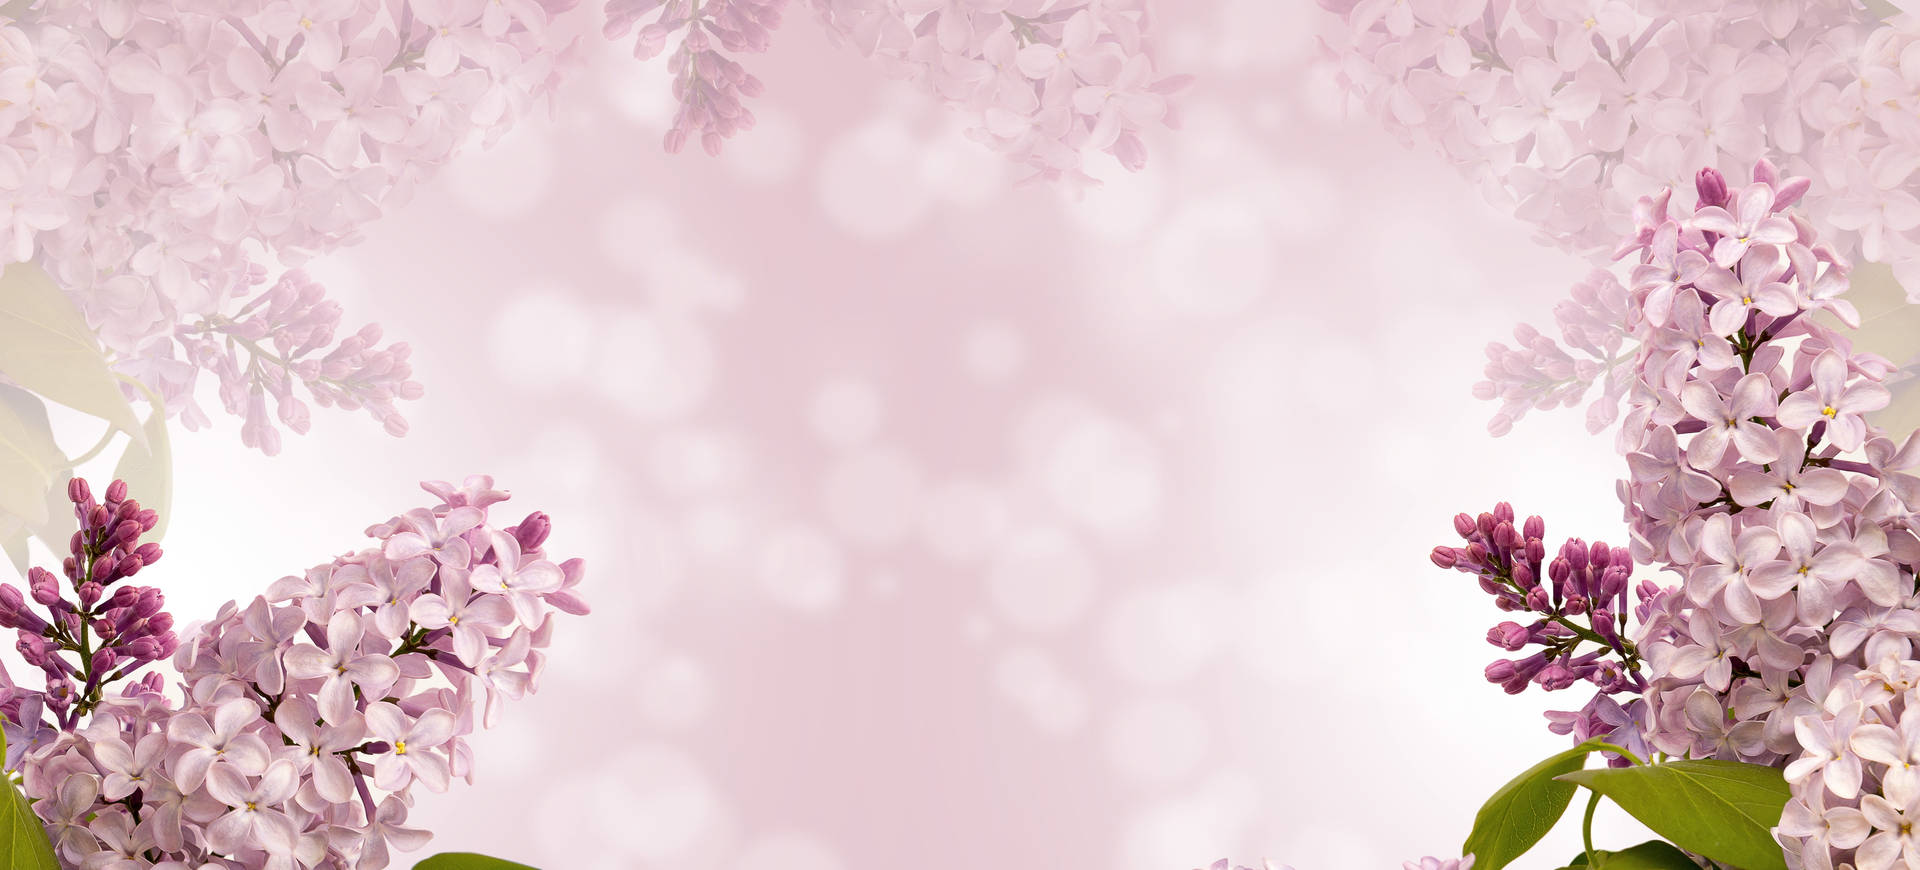 Background Design With Pink Flowers Picture